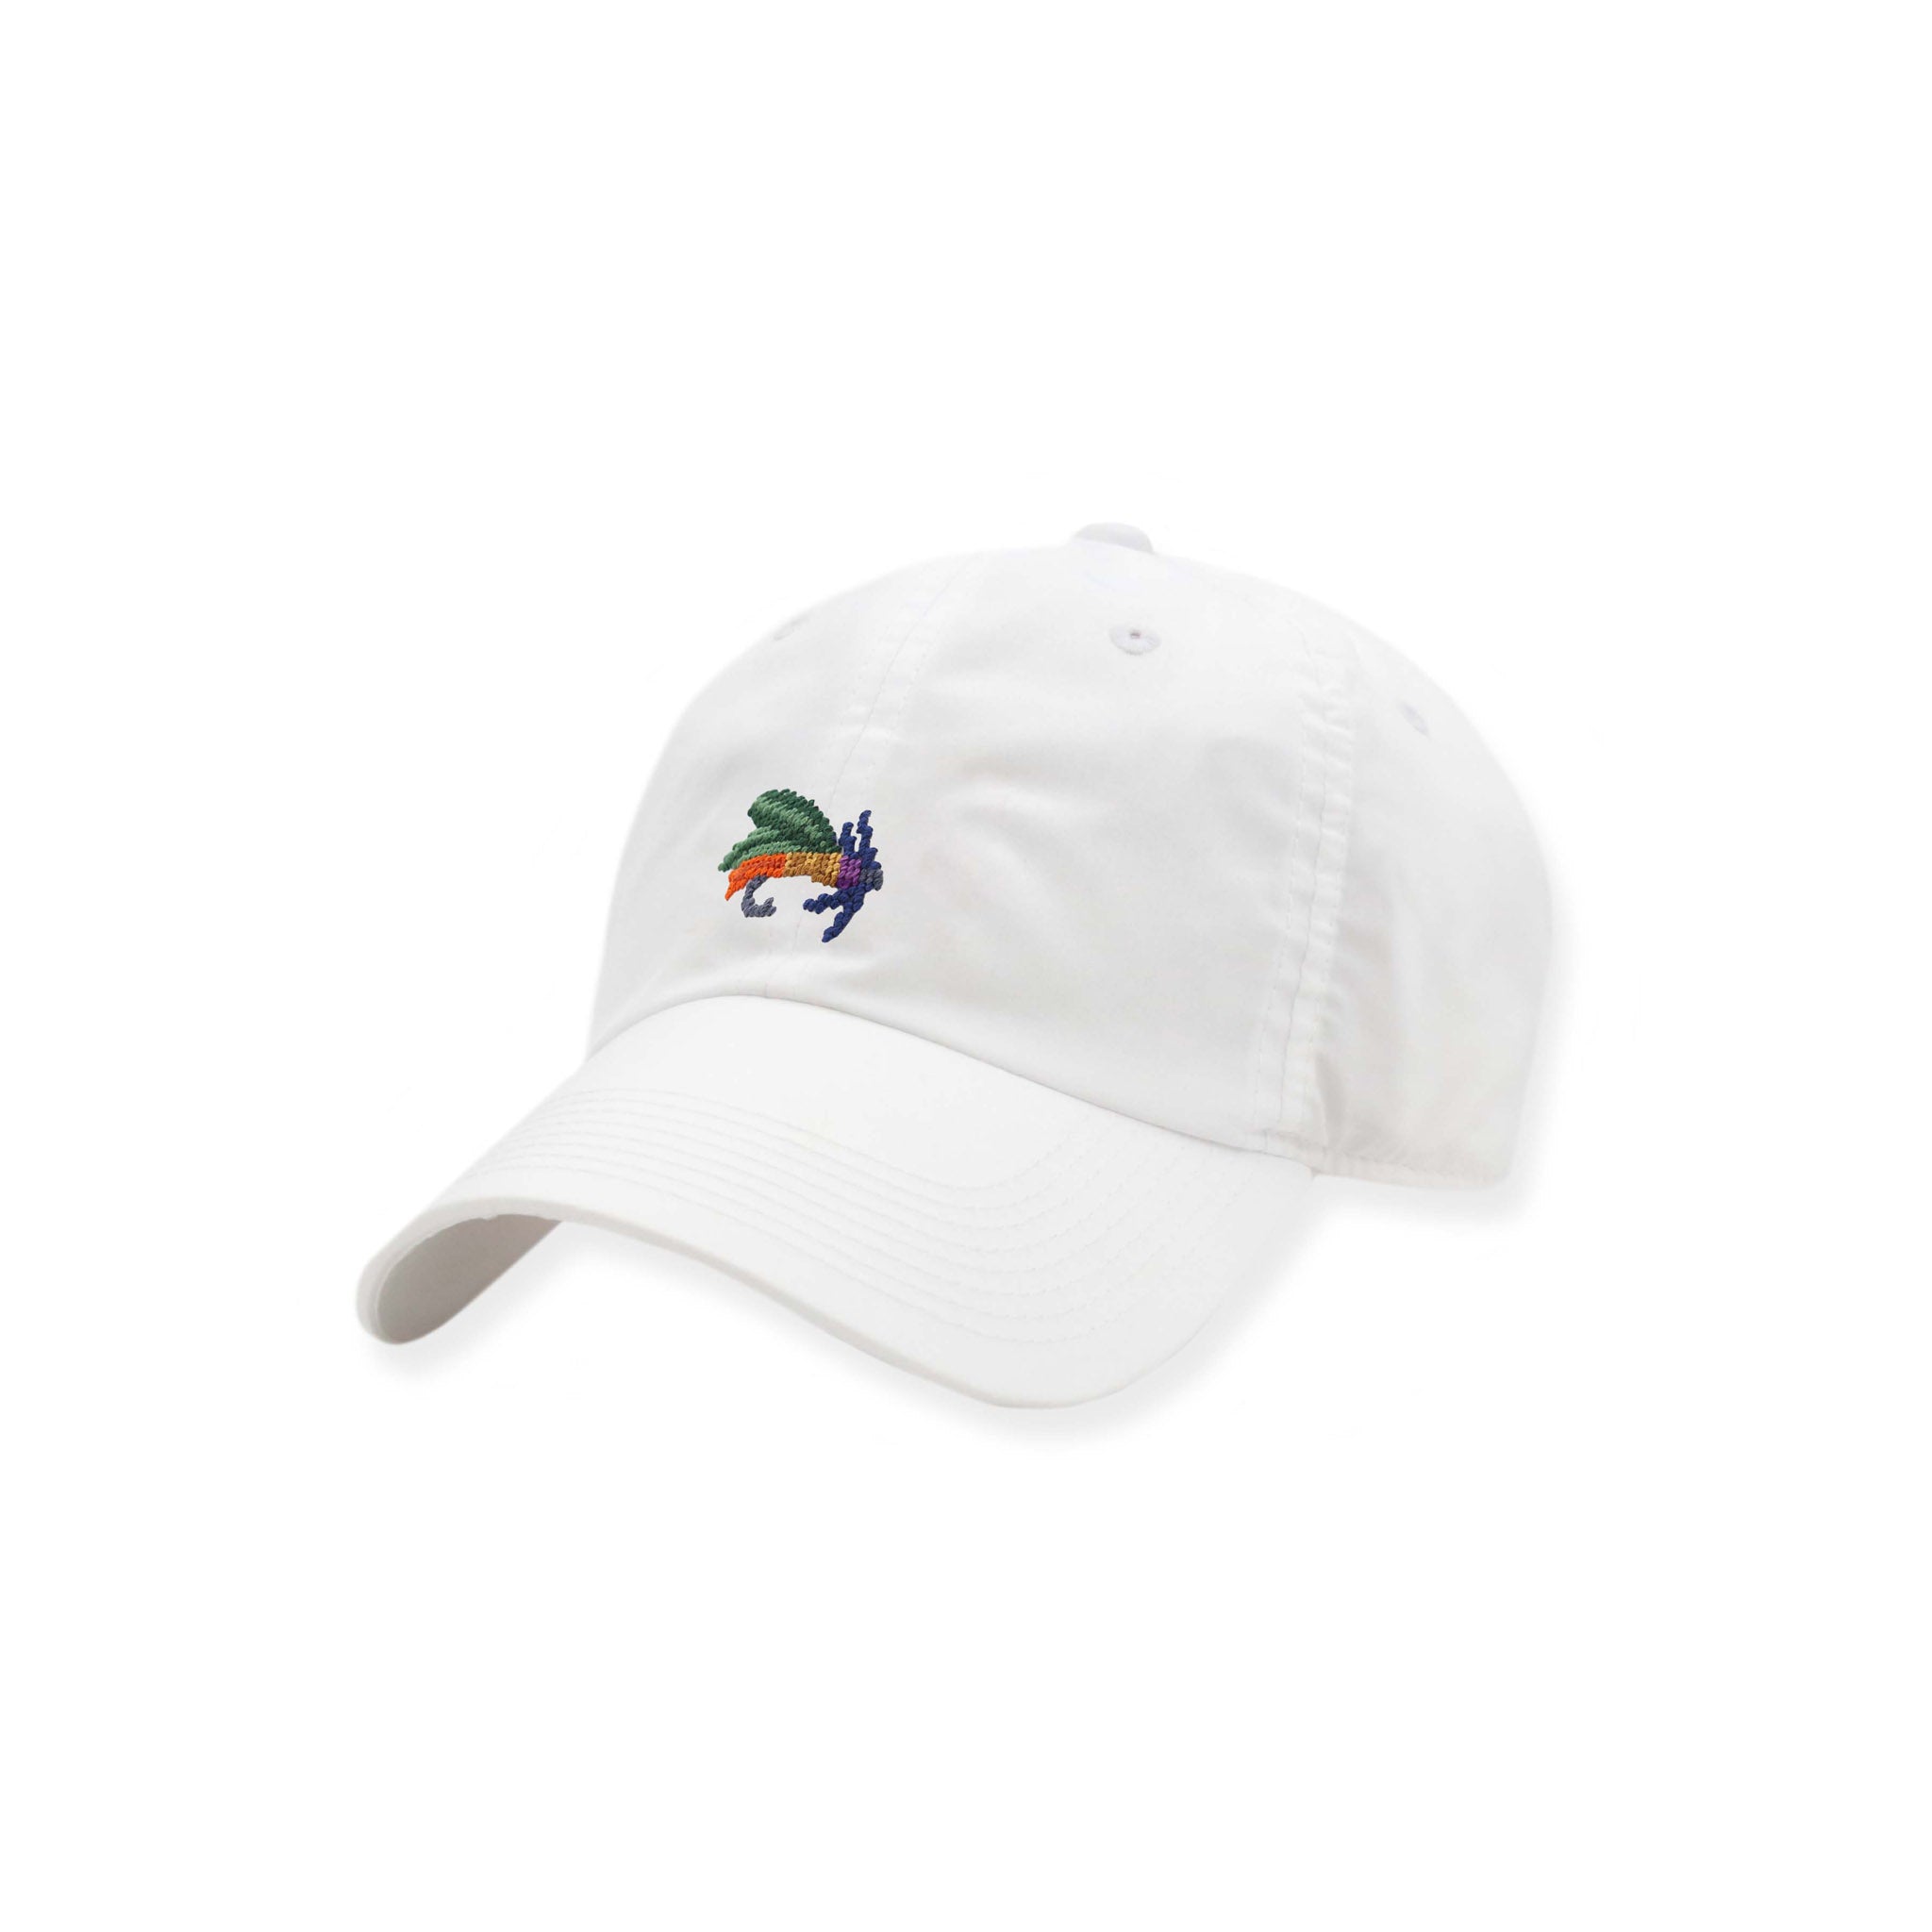 Fishing Fly Performance Hat (White) at Smathers and Branson